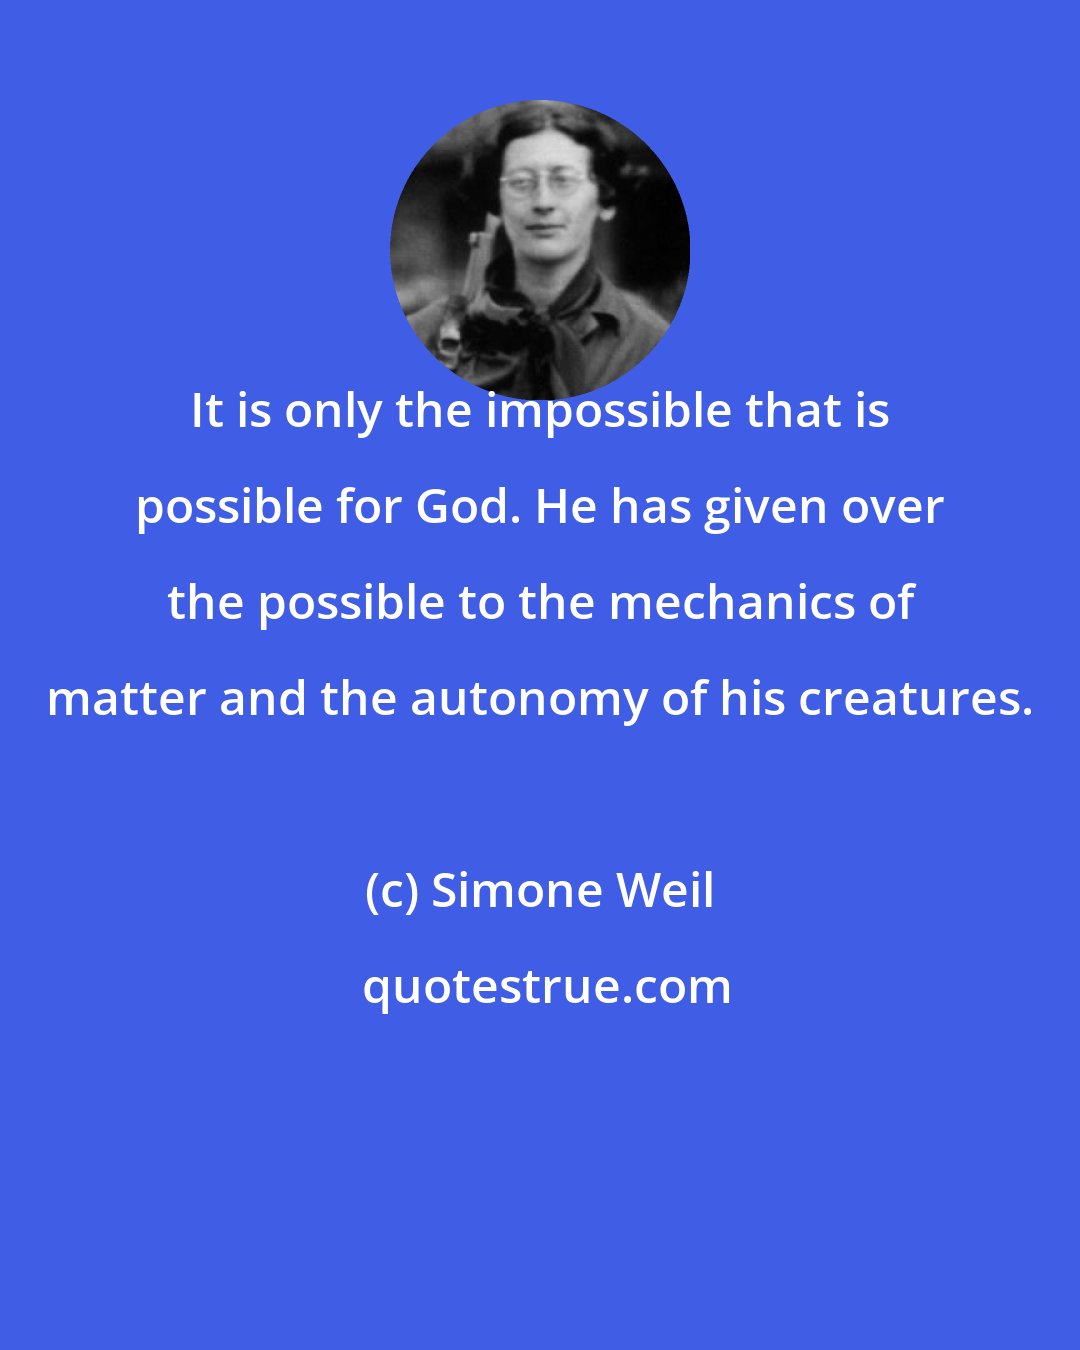 Simone Weil: It is only the impossible that is possible for God. He has given over the possible to the mechanics of matter and the autonomy of his creatures.